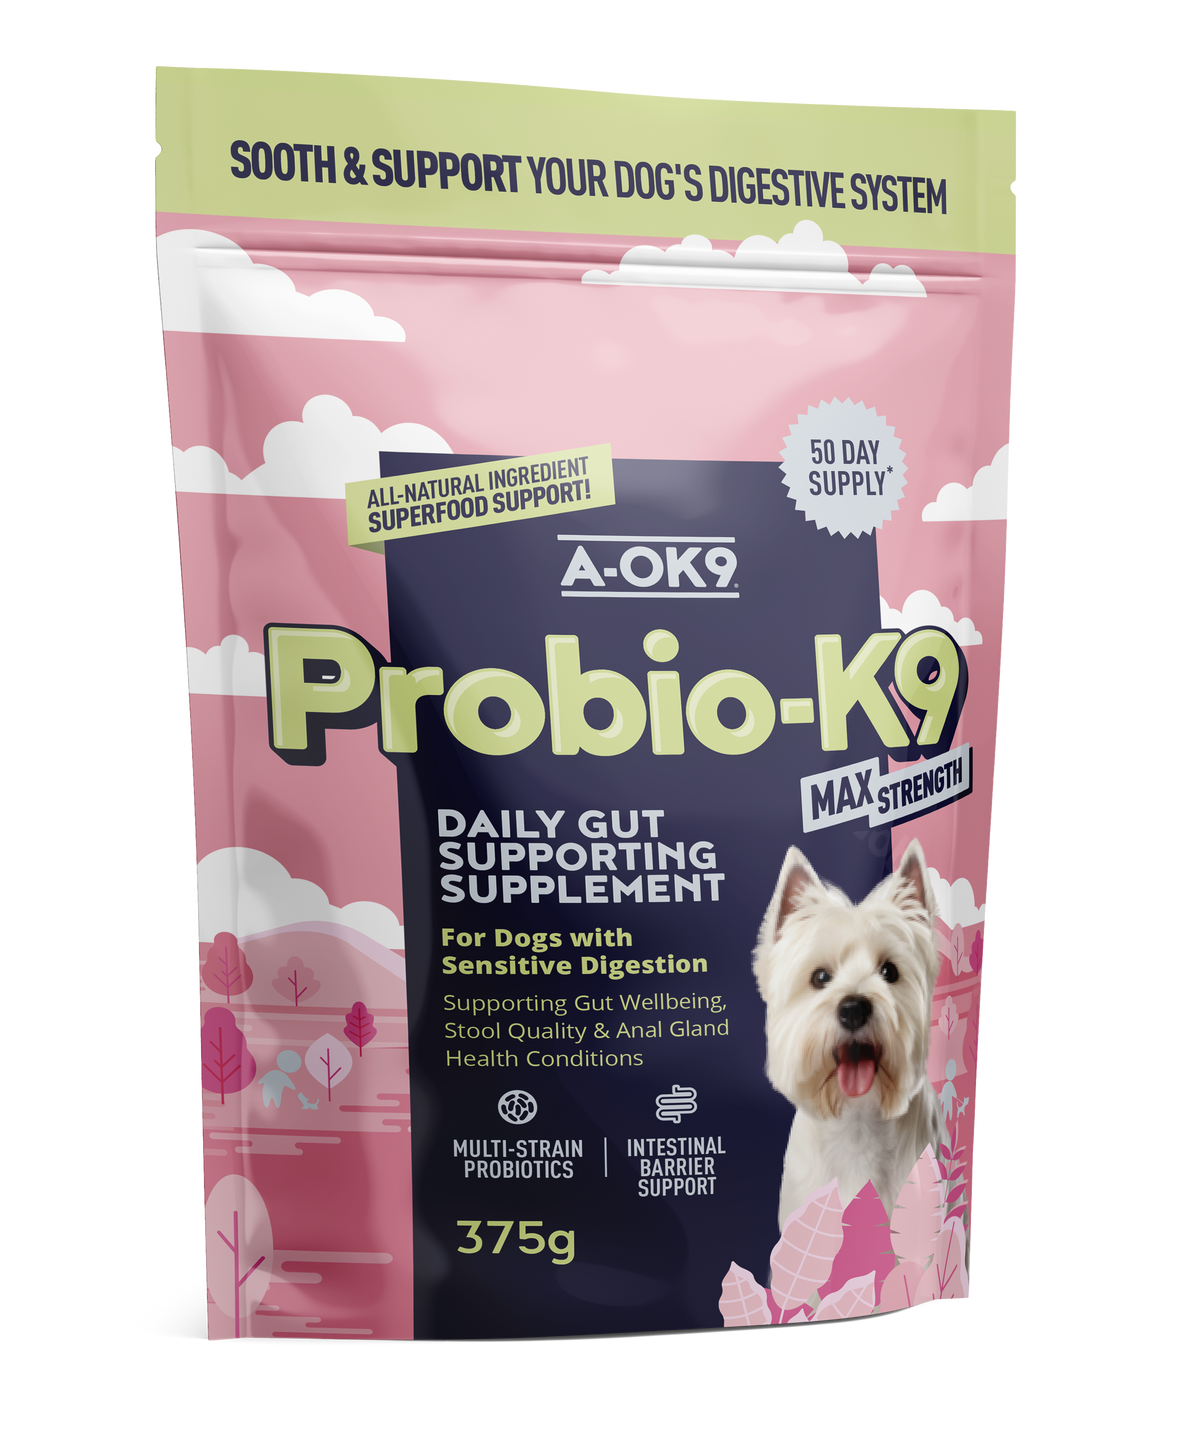 PROBIO-K9 - [1 Pouch Special at 30% Off]